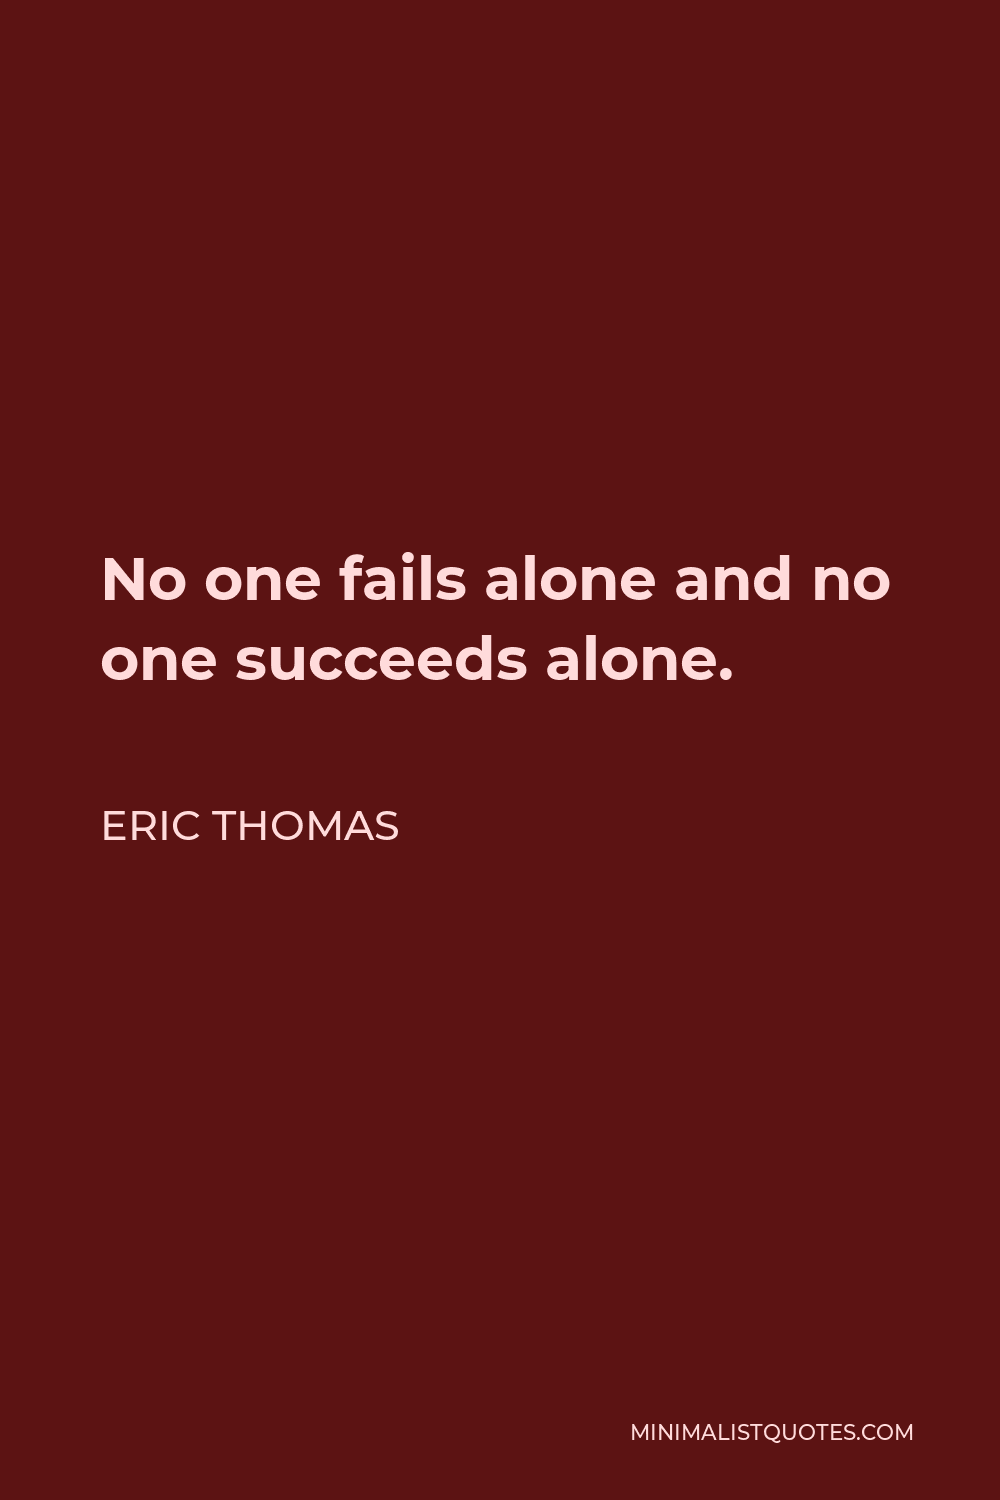 Eric Thomas Quote: No one fails alone and no one succeeds alone.